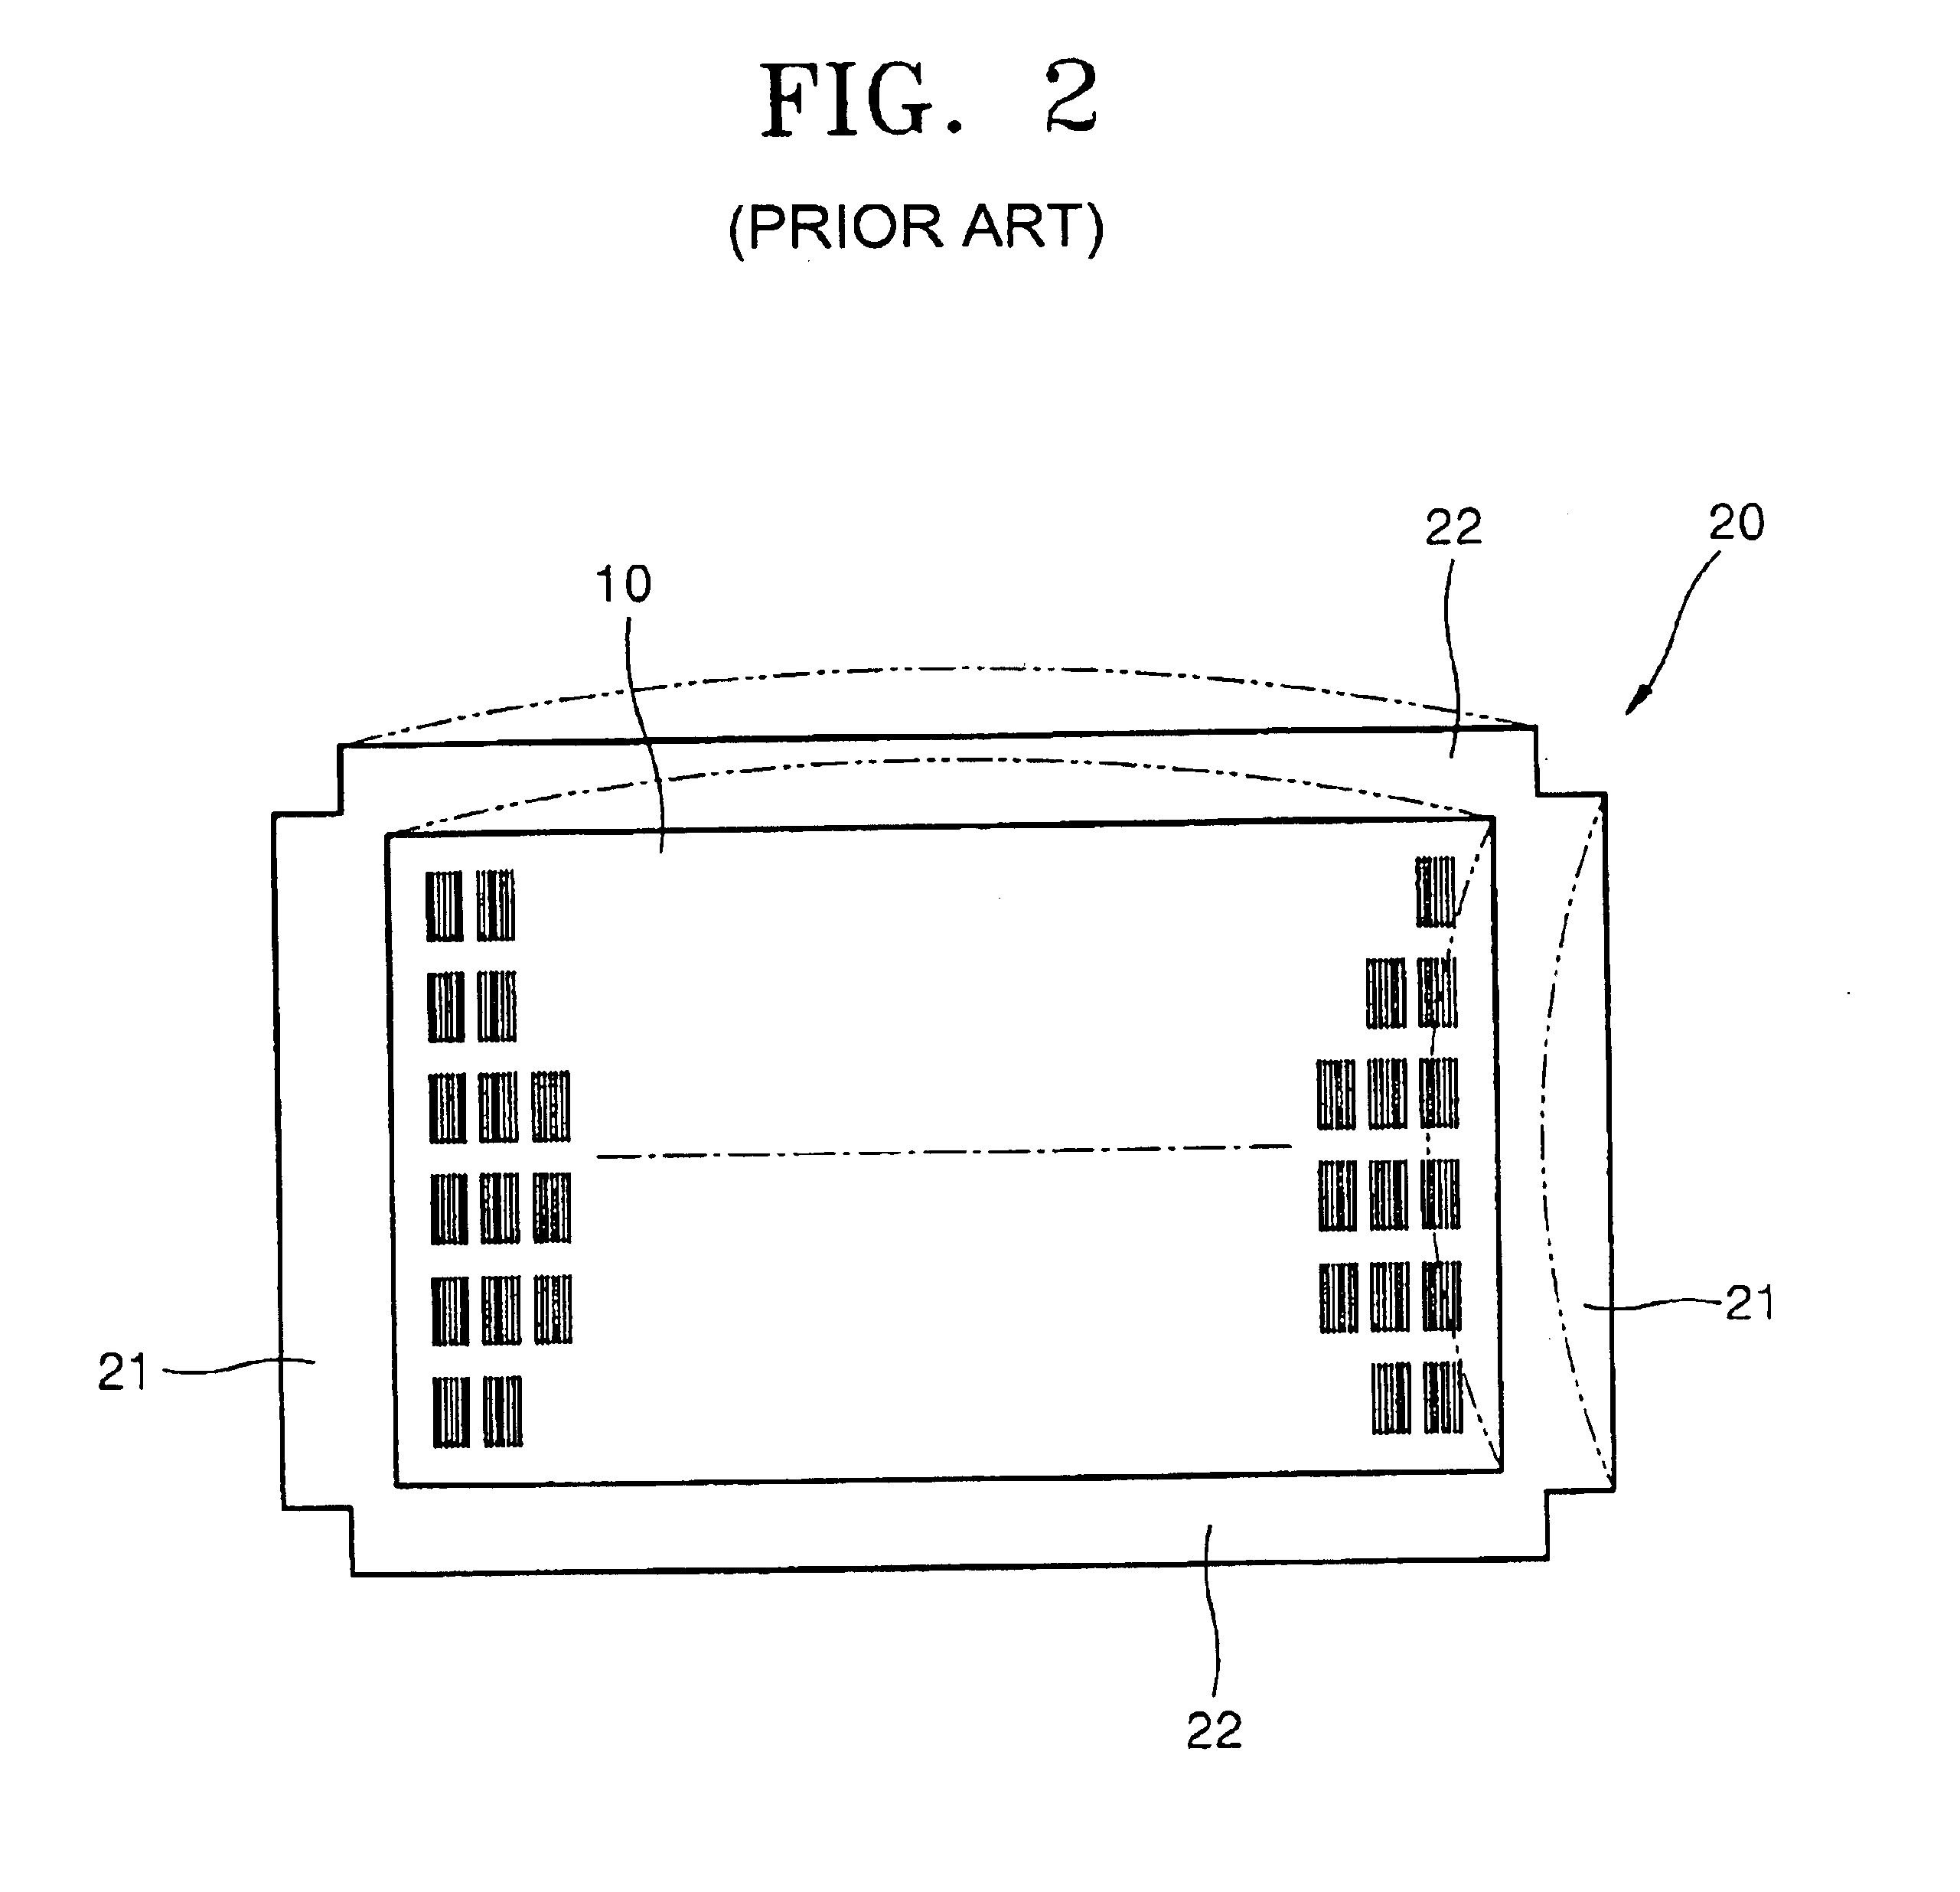 Tension mask assembly for use in vacuum deposition of thin film of organic electroluminescent device